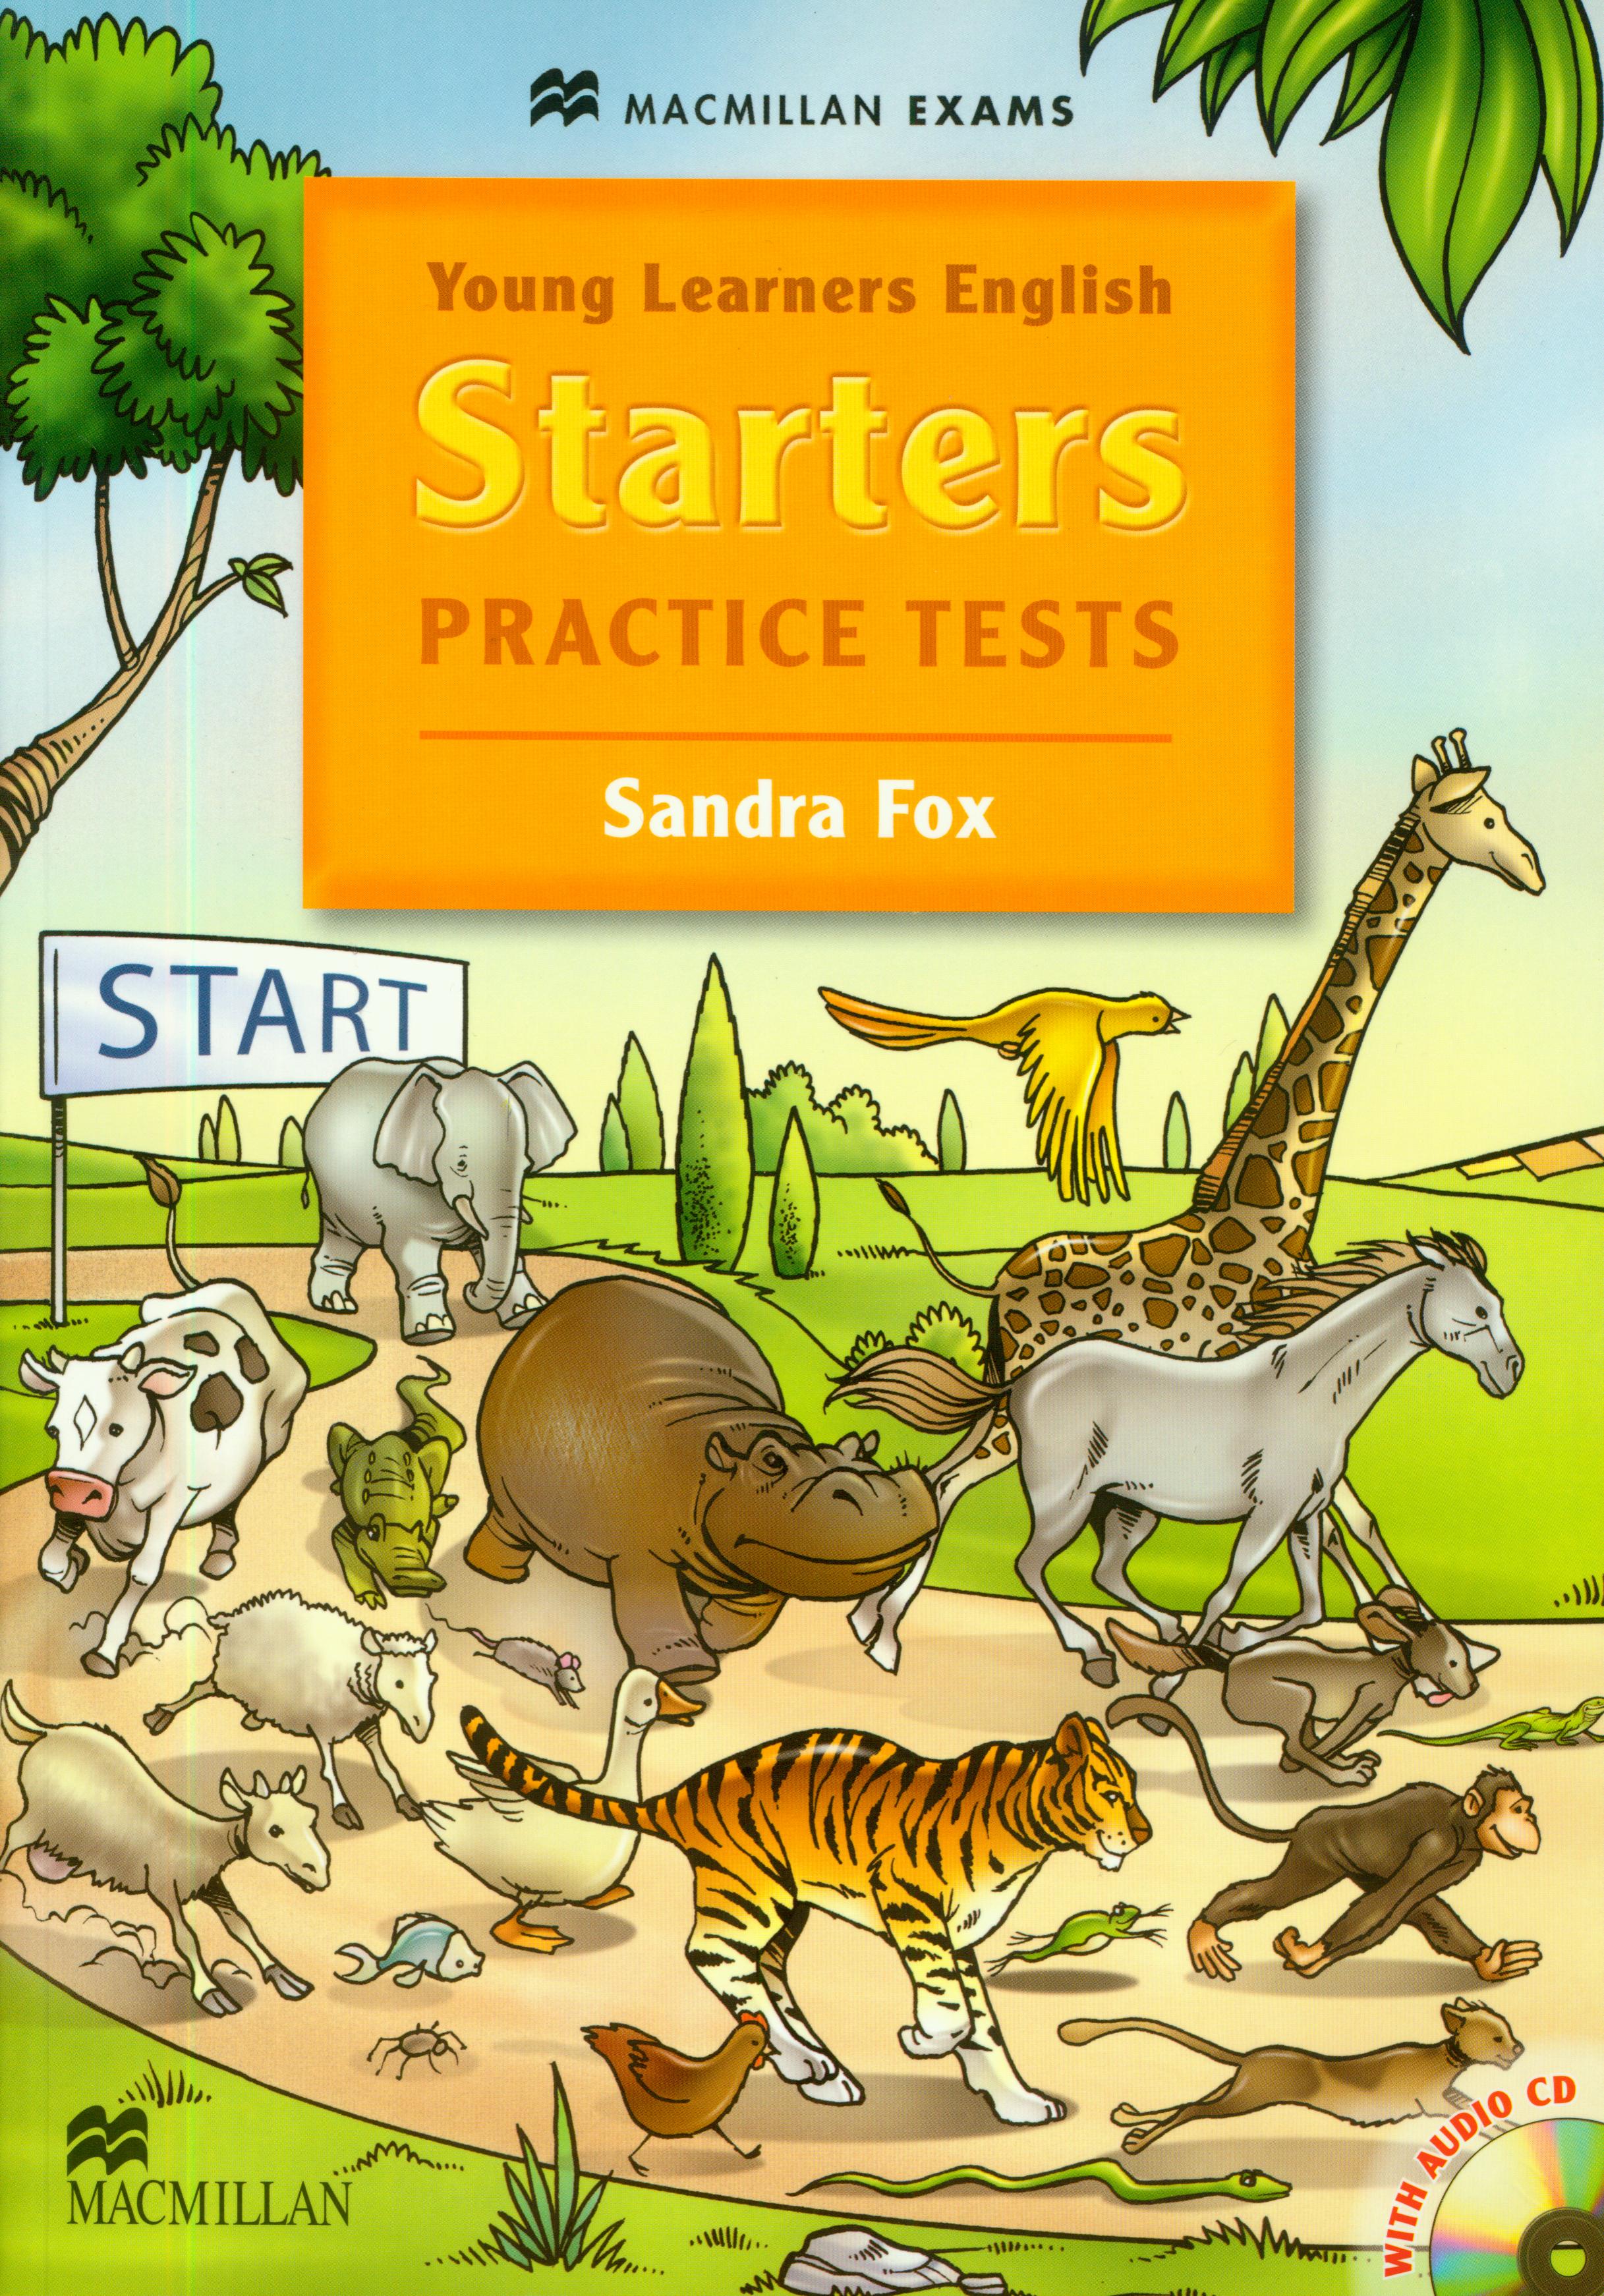 Yle starters. Young Learners English Starters. Starters Practice Tests. Practice Tests for Starters. Macmillan Practice Tests.